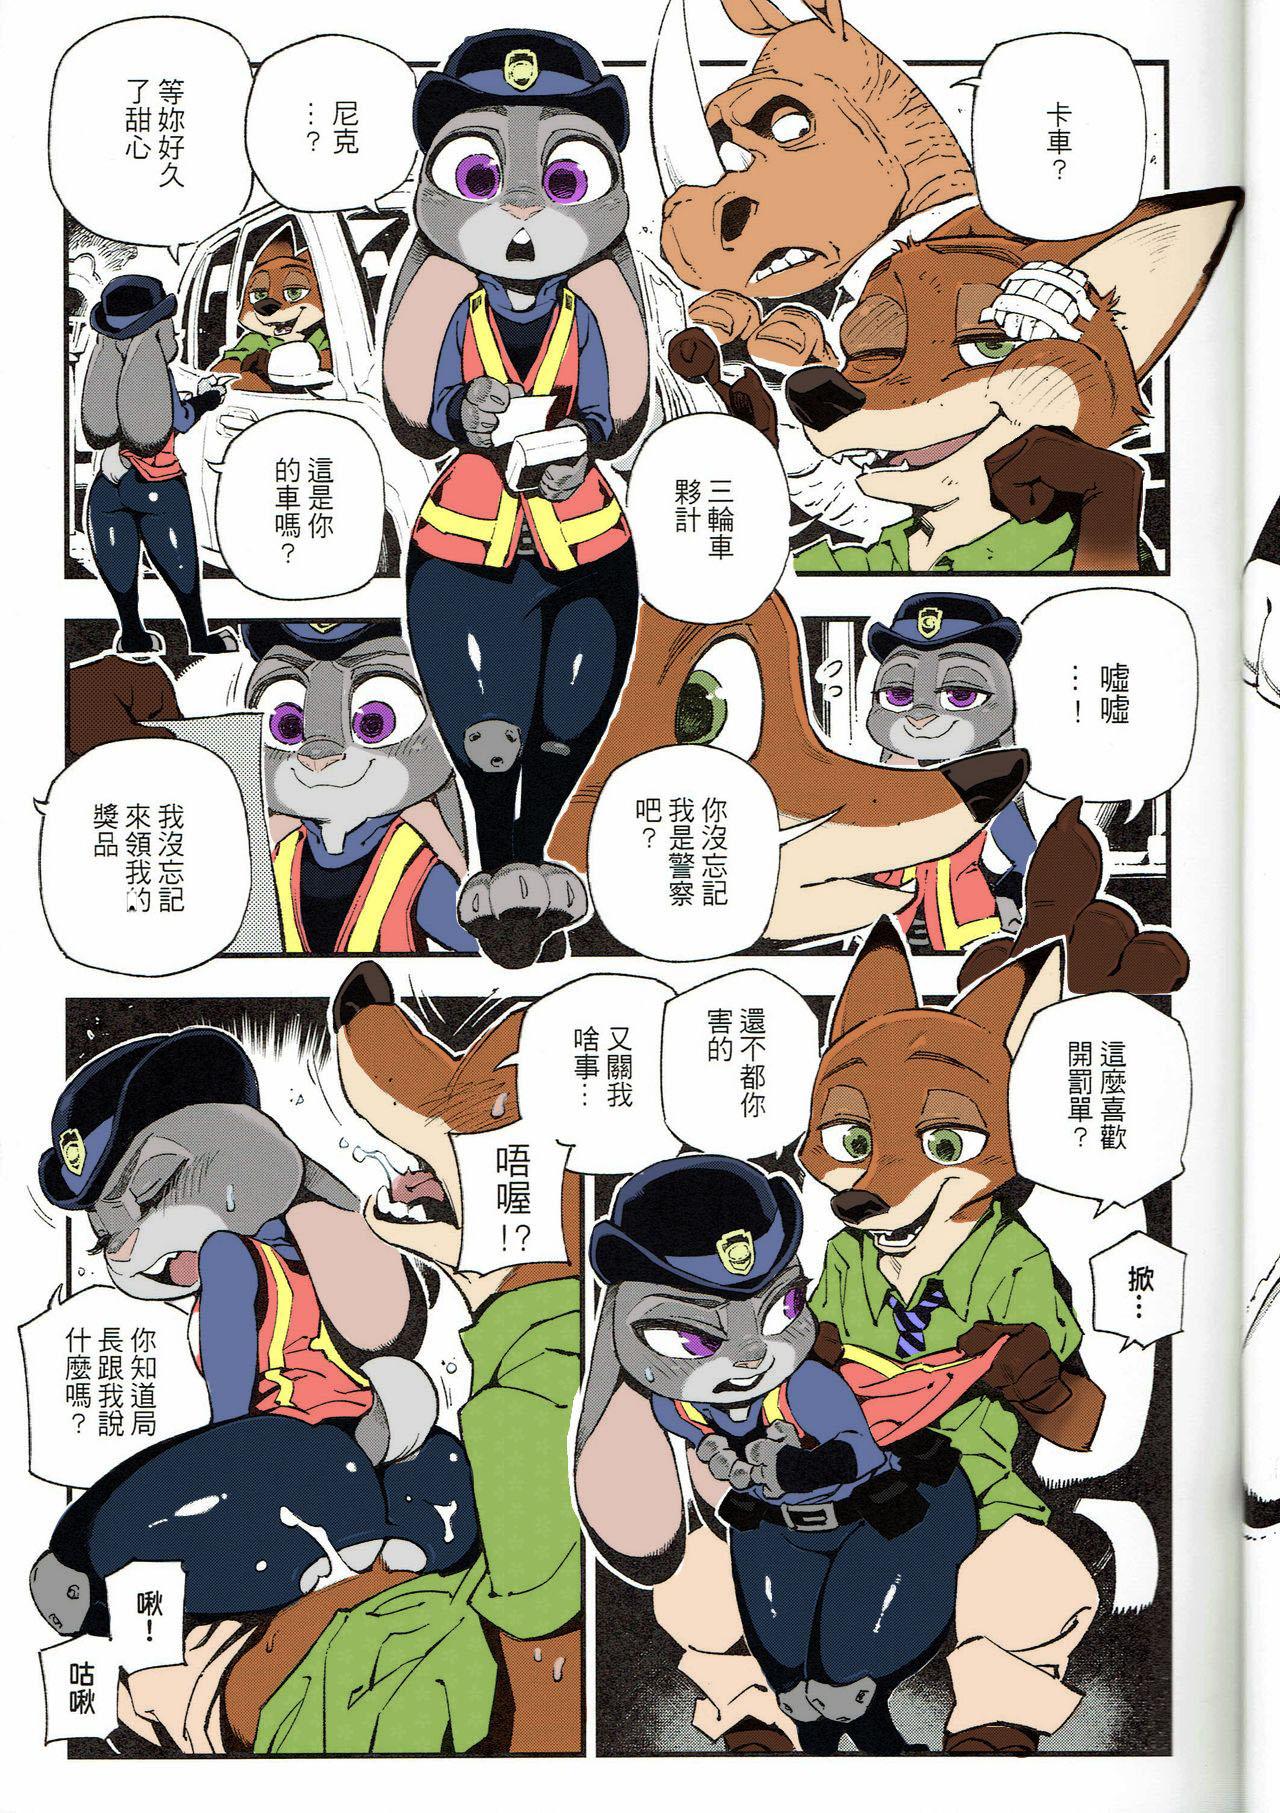 Style What Does The Fox Say? - Zootopia Ex Gf - Page 11